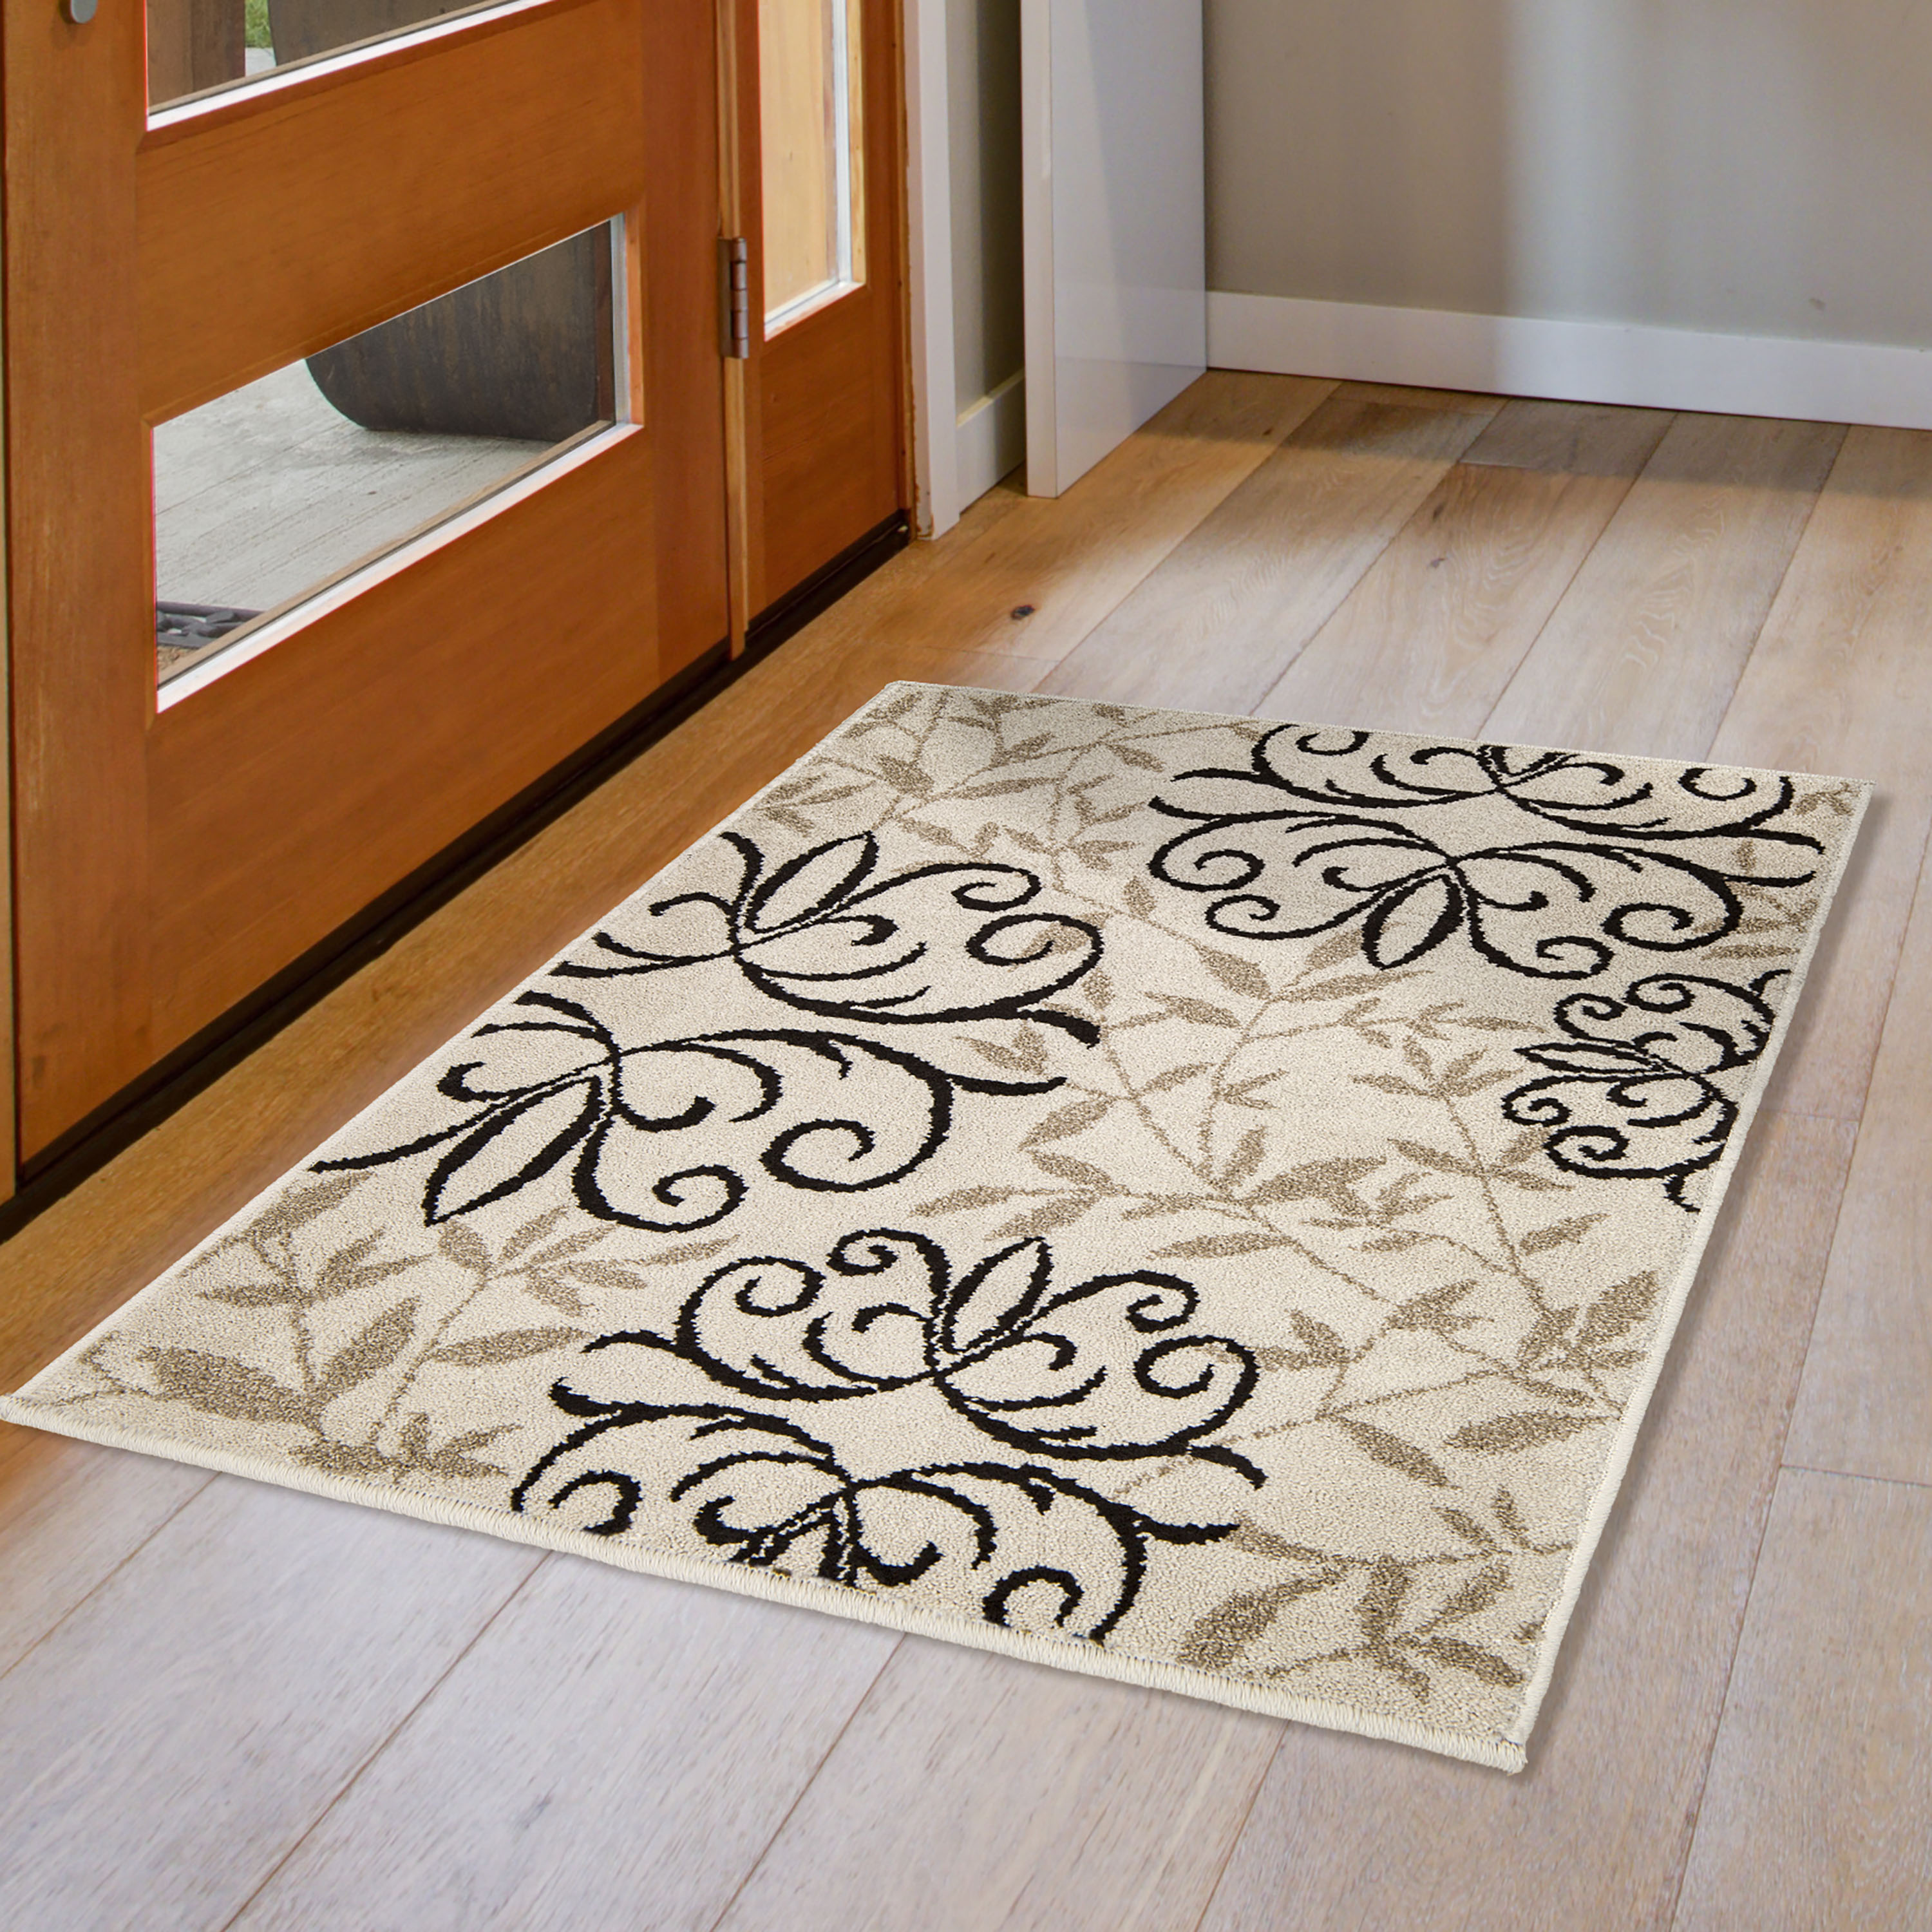 Better Homes & Gardens Iron Fleur 1'8" X 2'10" Off White Floral Rug - image 1 of 6